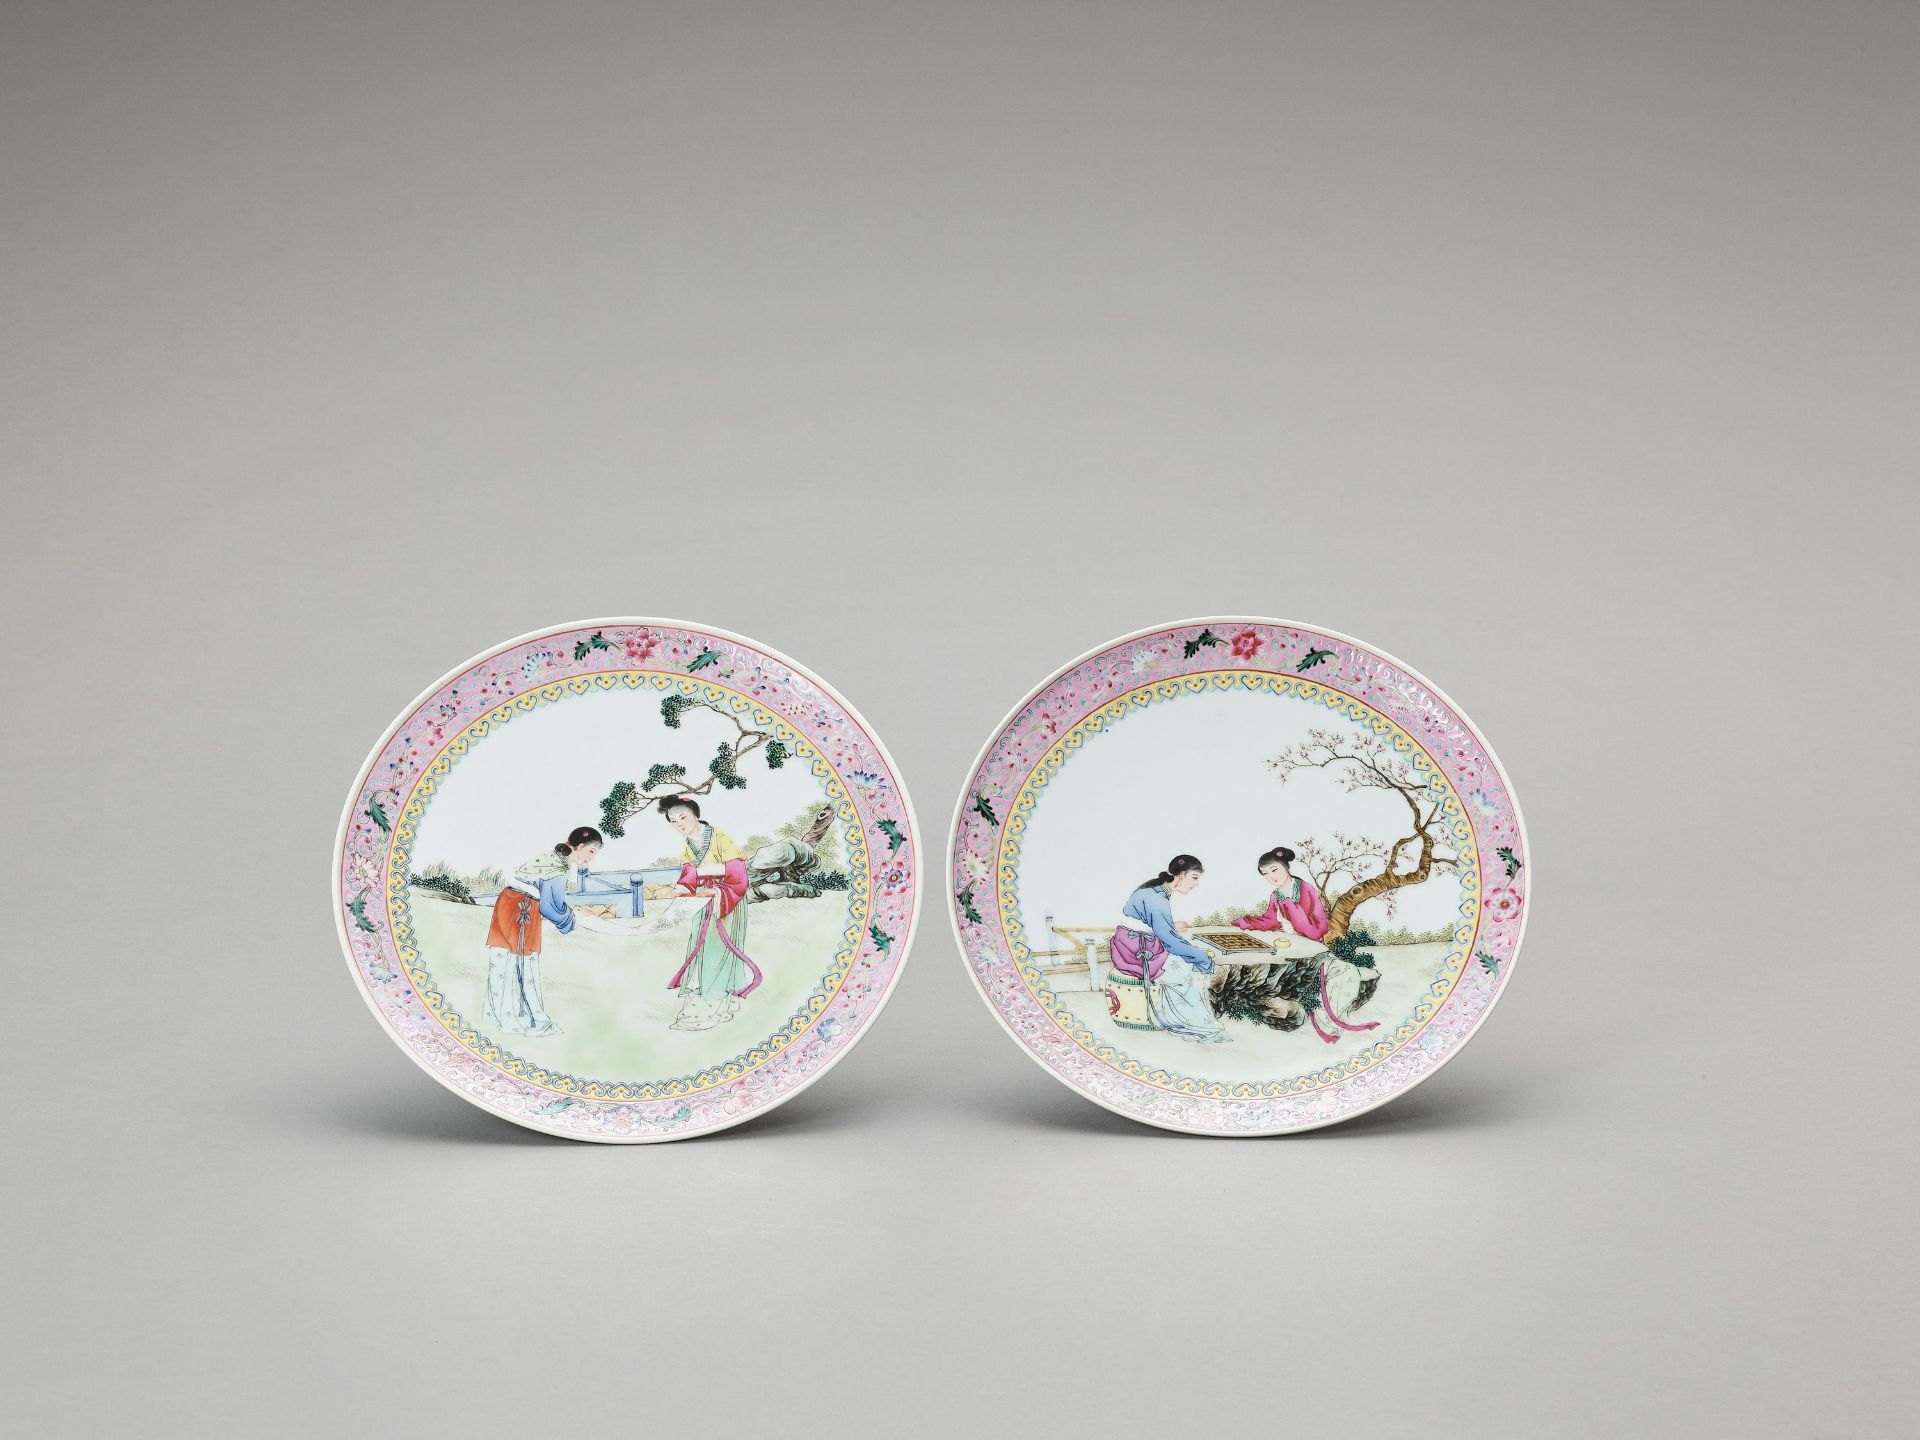 A PAIR OF FAMILLE VERTE PORCELAIN DISHES, 20TH CENTURY